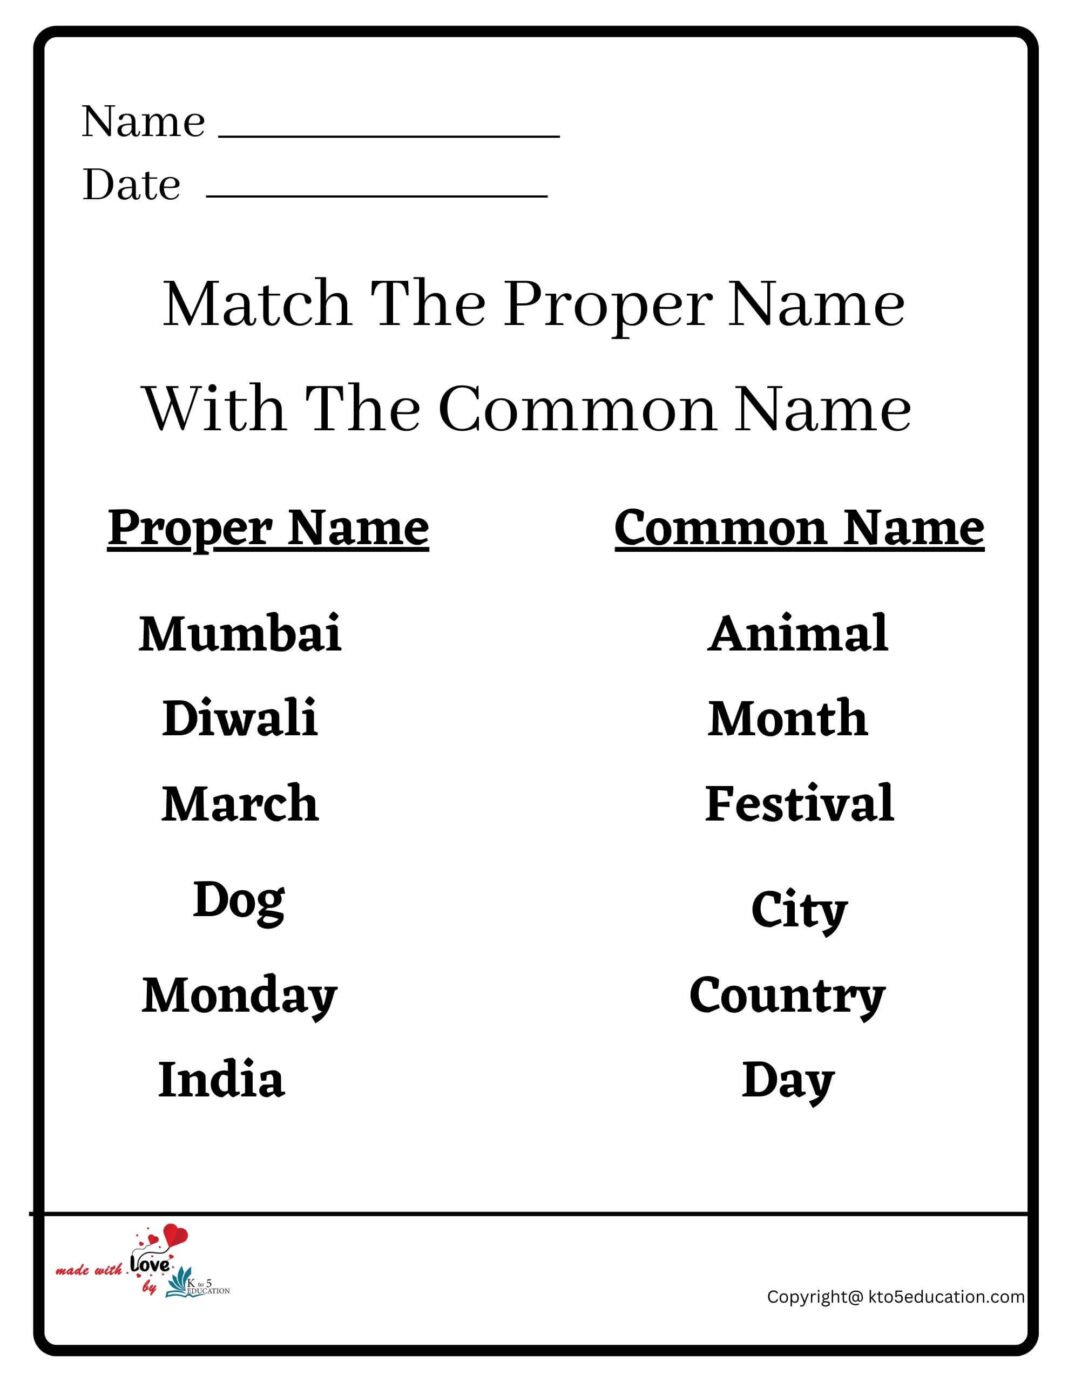 match-the-proper-name-with-the-common-name-worksheet